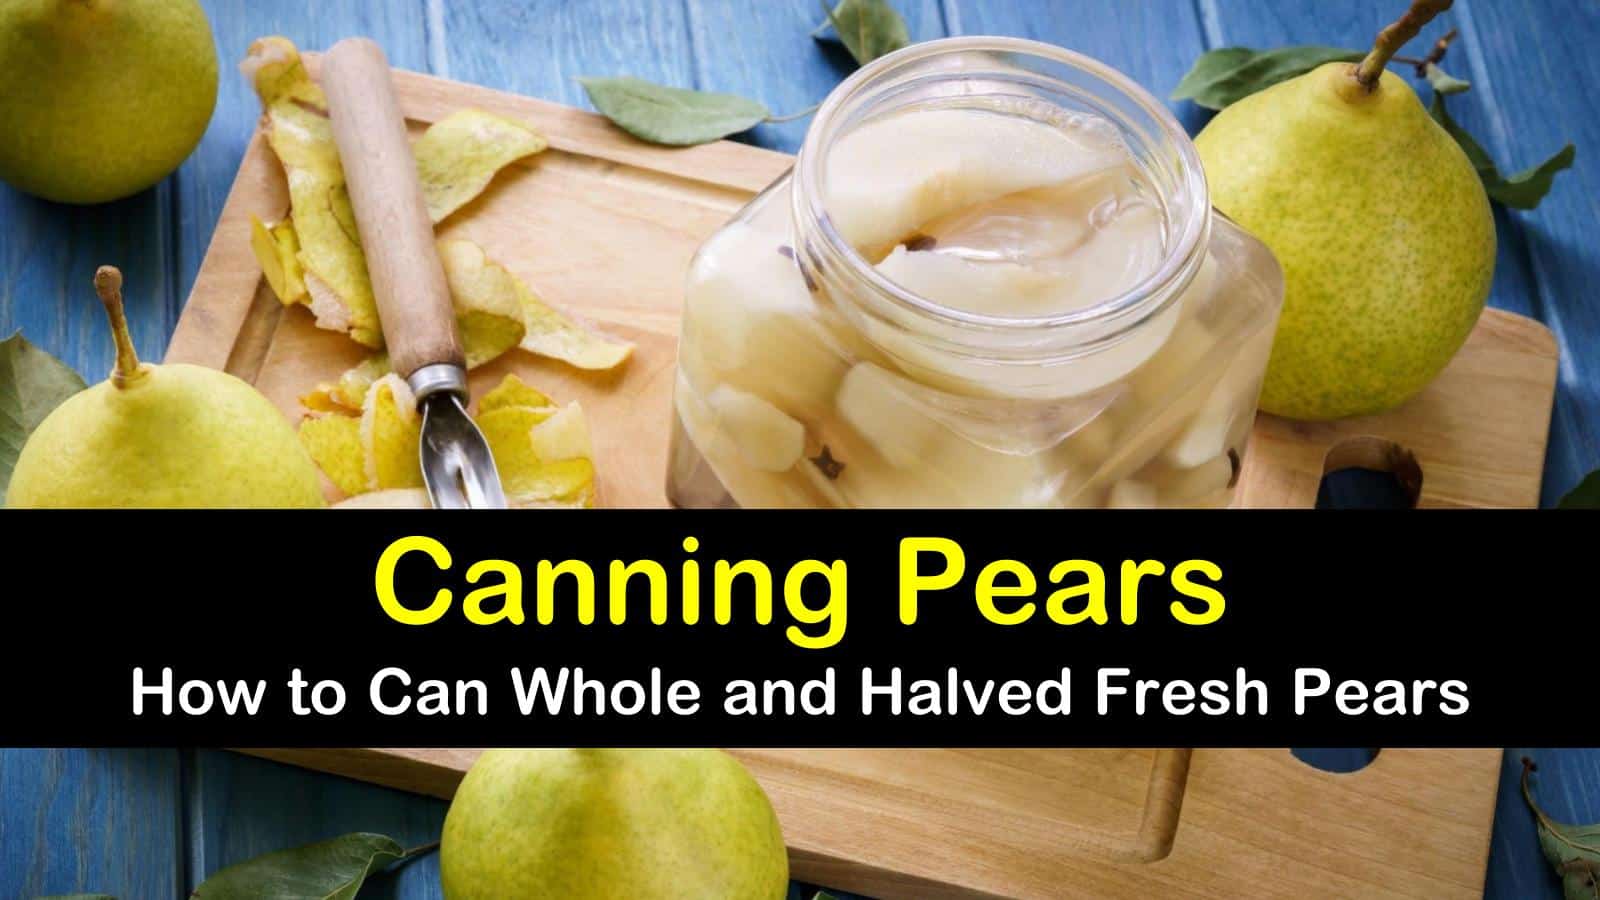 canning pears titleimg1